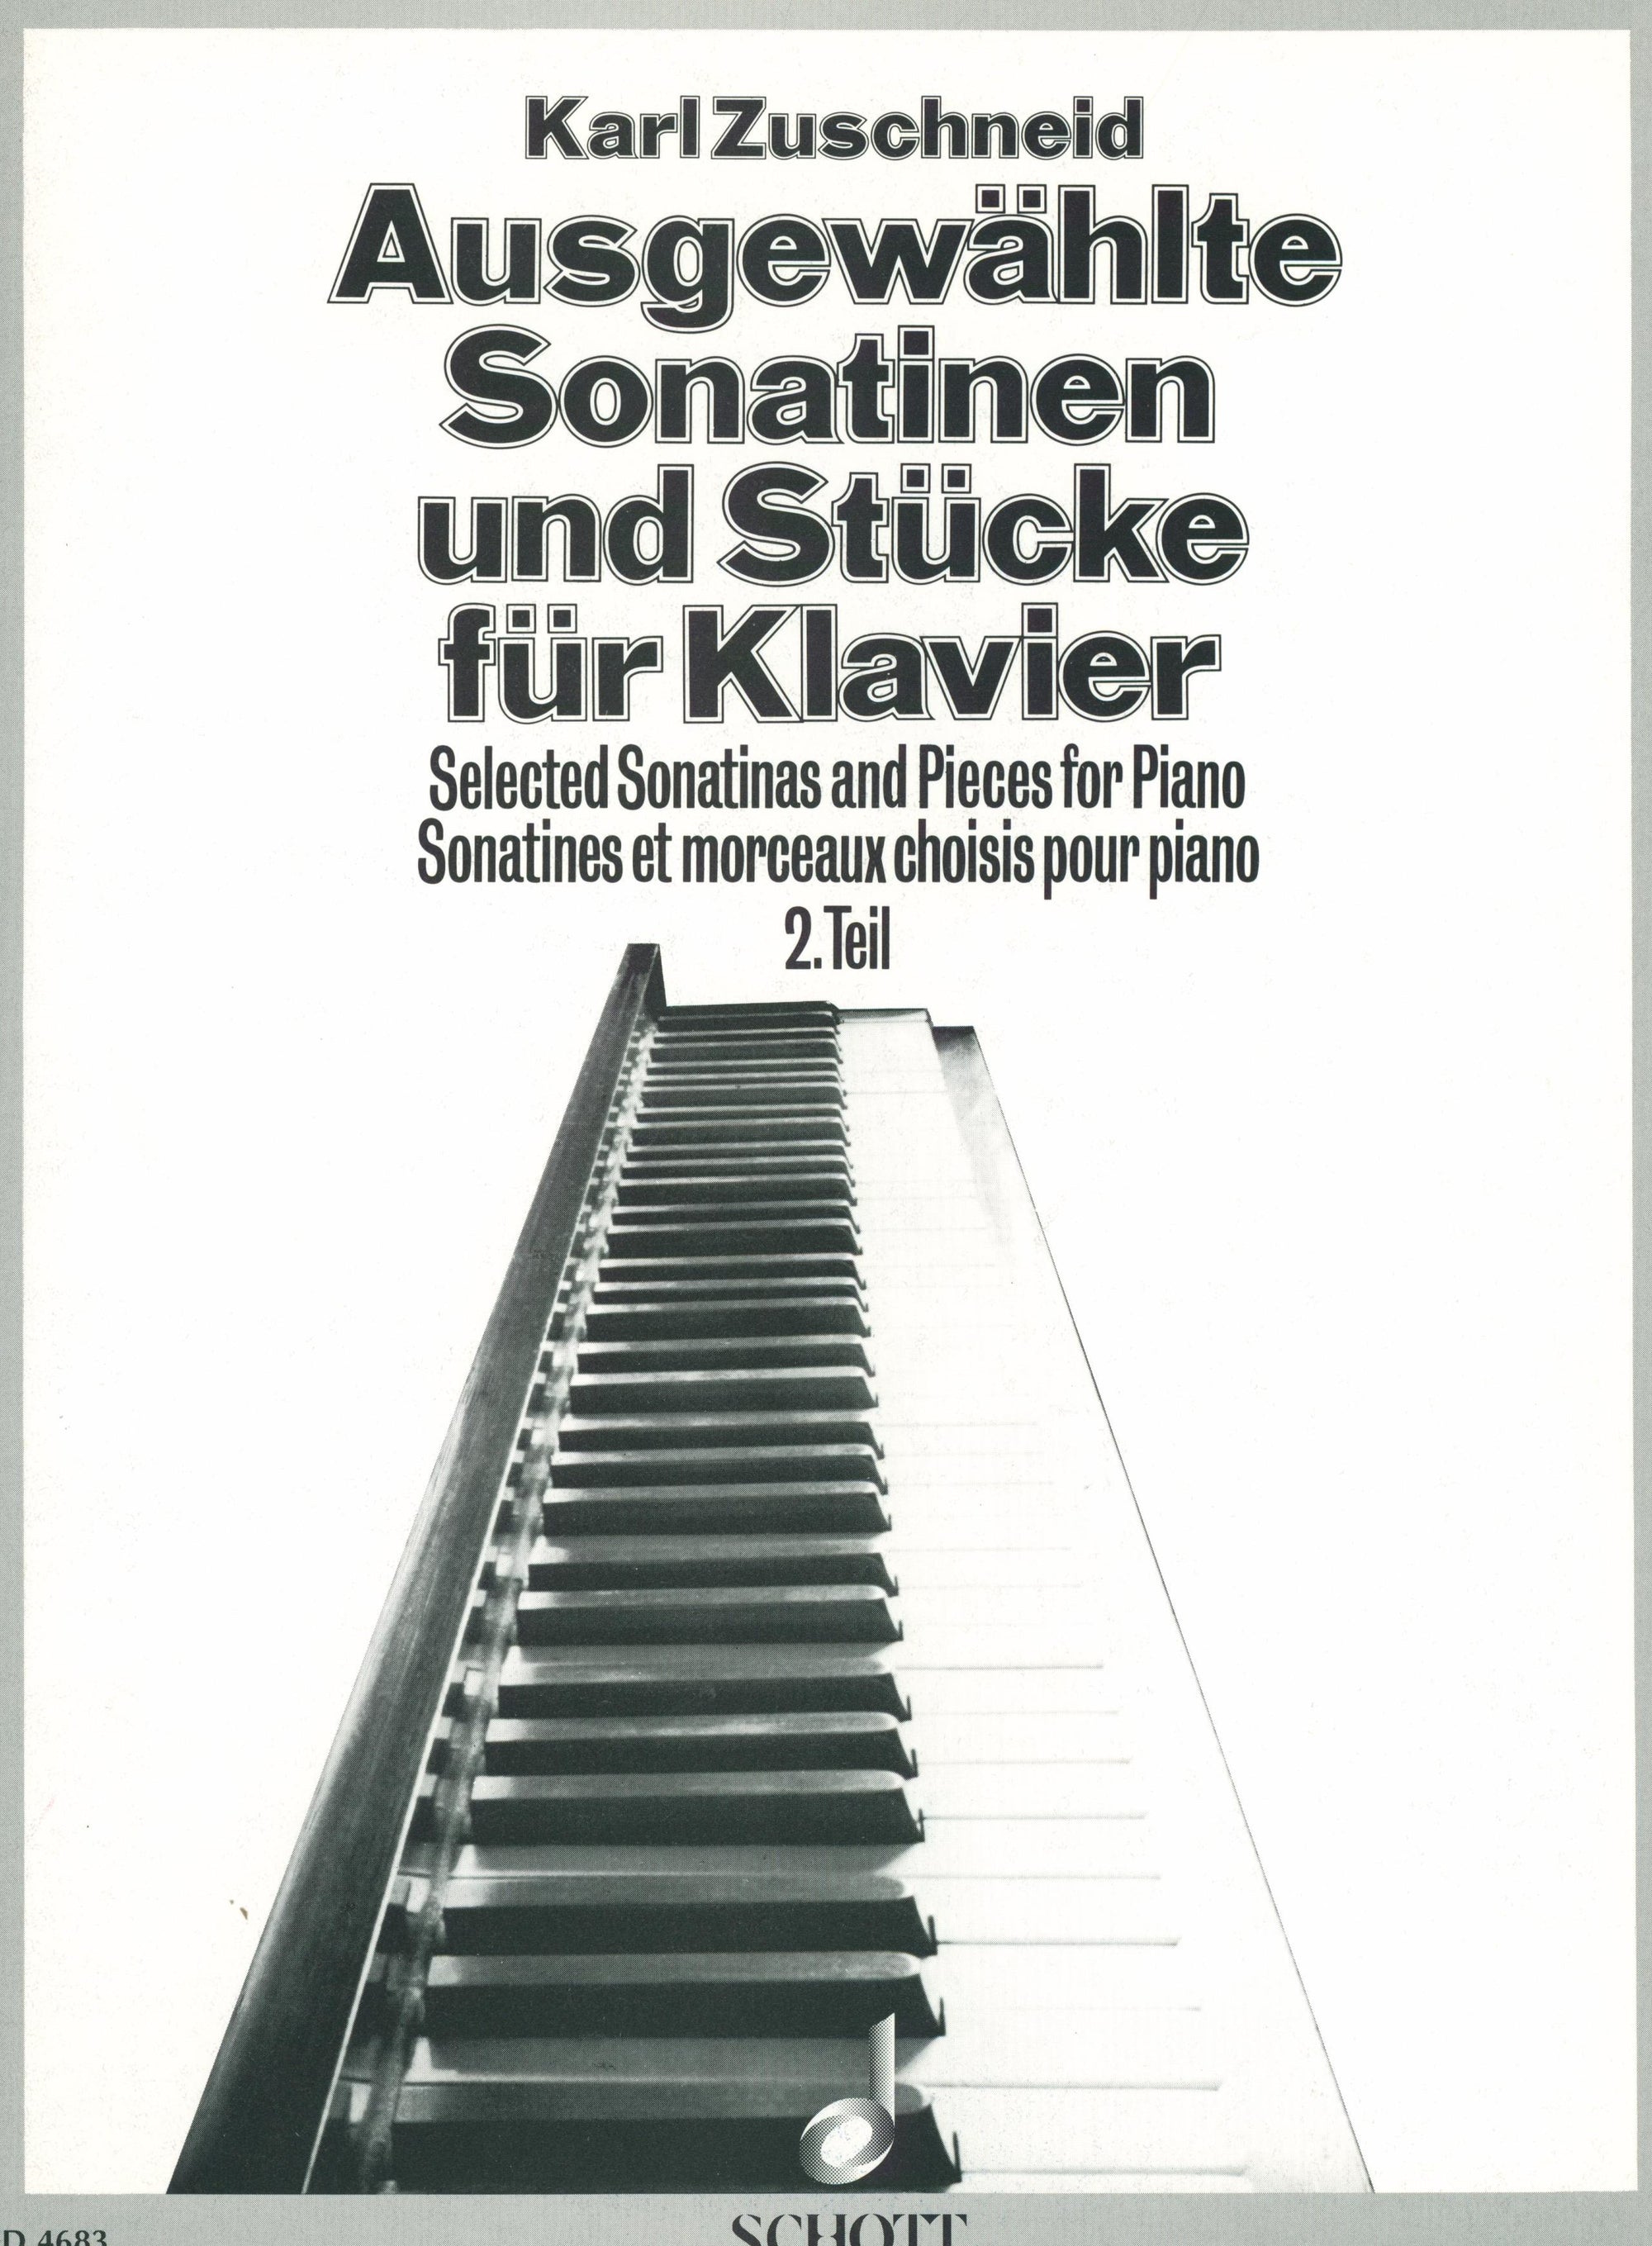 Selected Sonatinas and Pieces for Piano - Volume 2